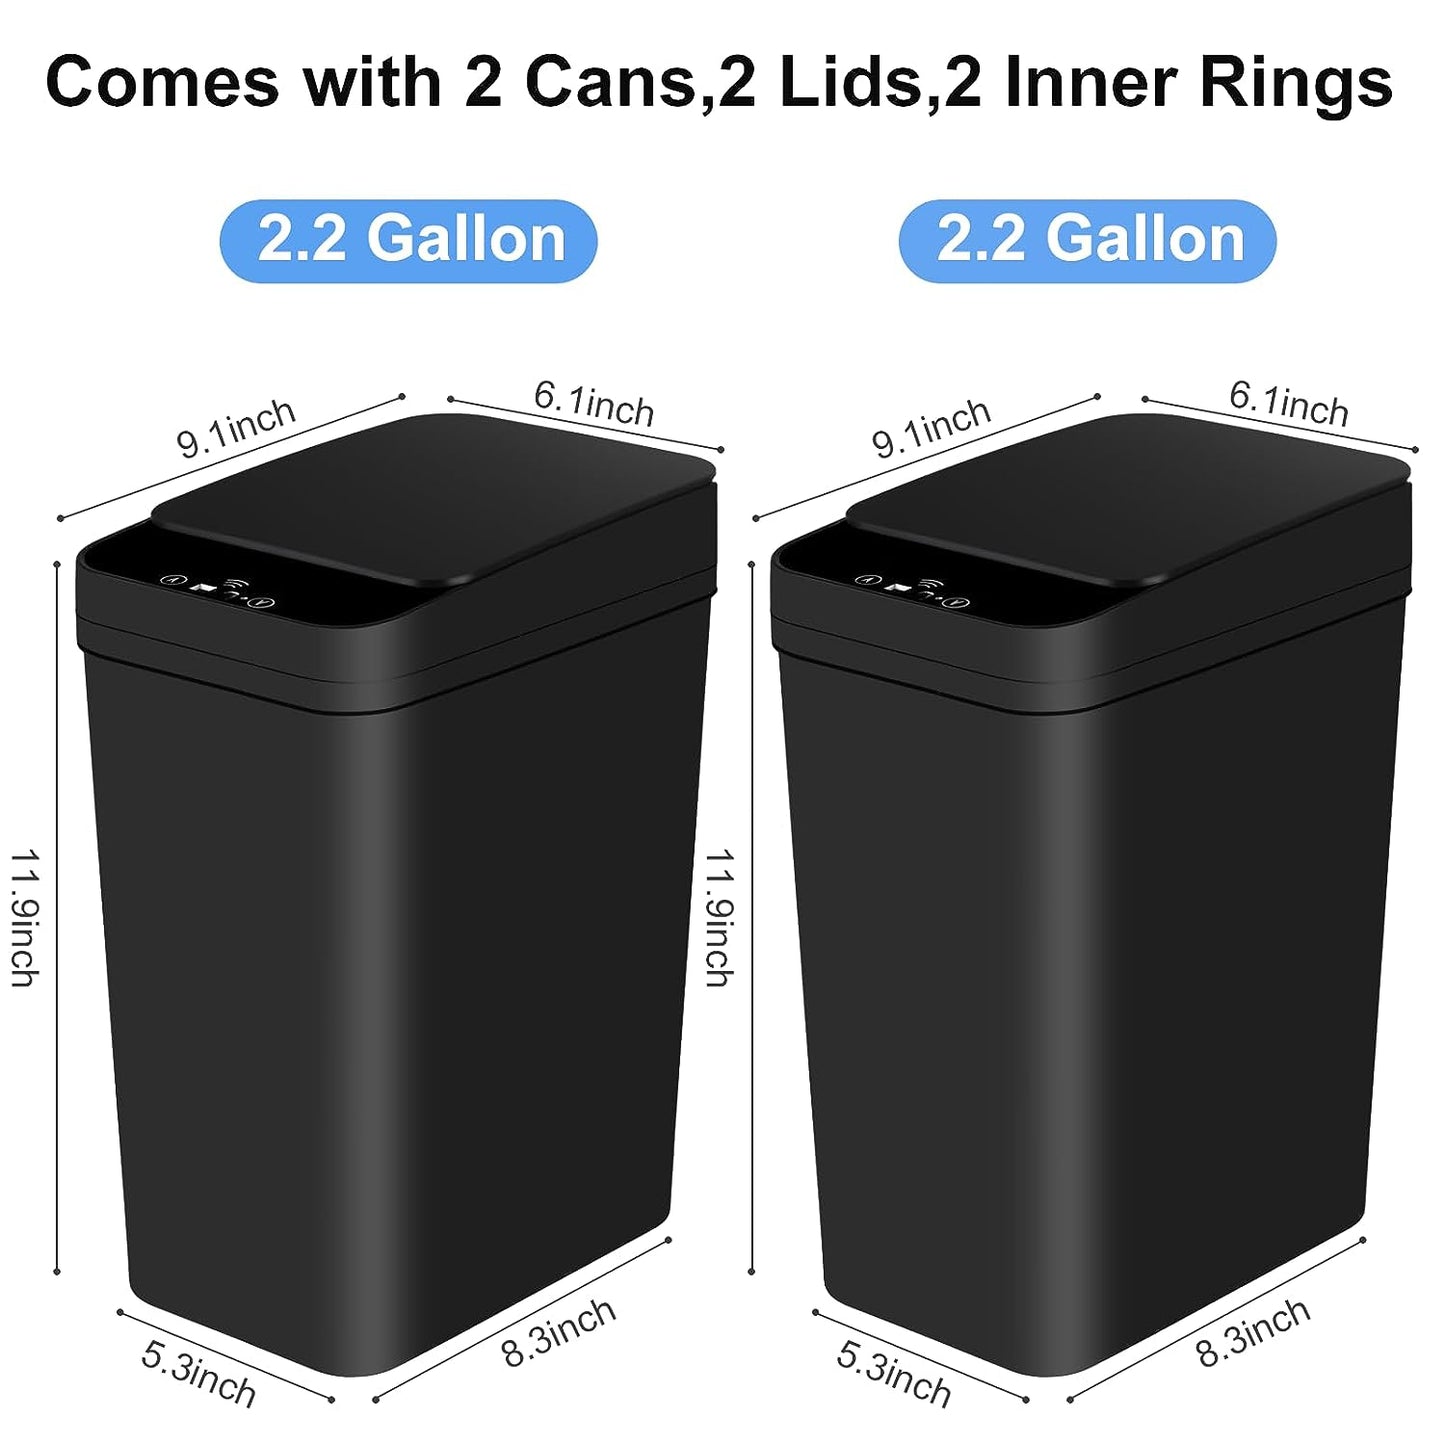 EXCELLENT Bathroom Automatic Trash Can 2 Pack 2.2 Gallon Touchless Motion Sensor Small Slim Garbage Can with Lid Smart Electric Narrow Waterproof Garbage Bin for Bedroom Office Kitchen (Black)